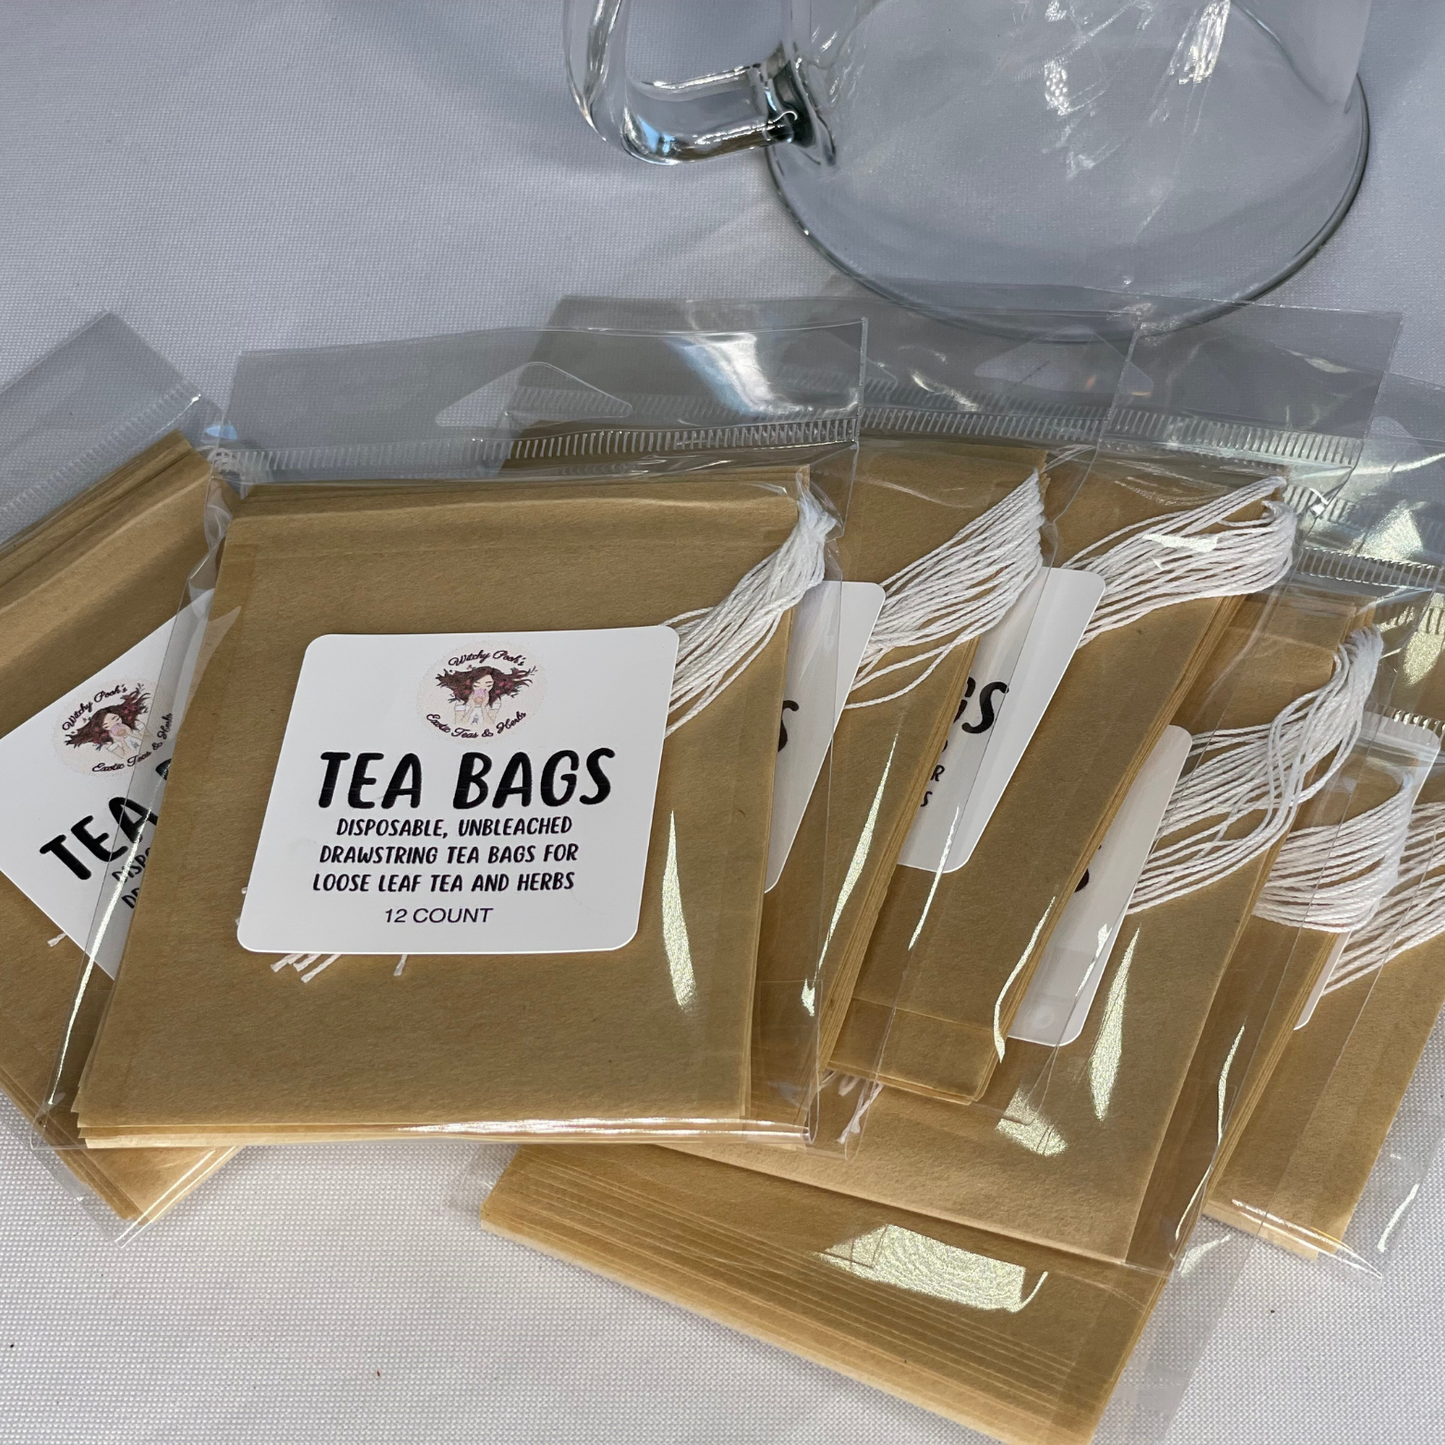 Witchy Pooh's Tea Bags for Loose Leaf Tea, 12 pack, Filtered, Disposable, Drawstring, Unbleached